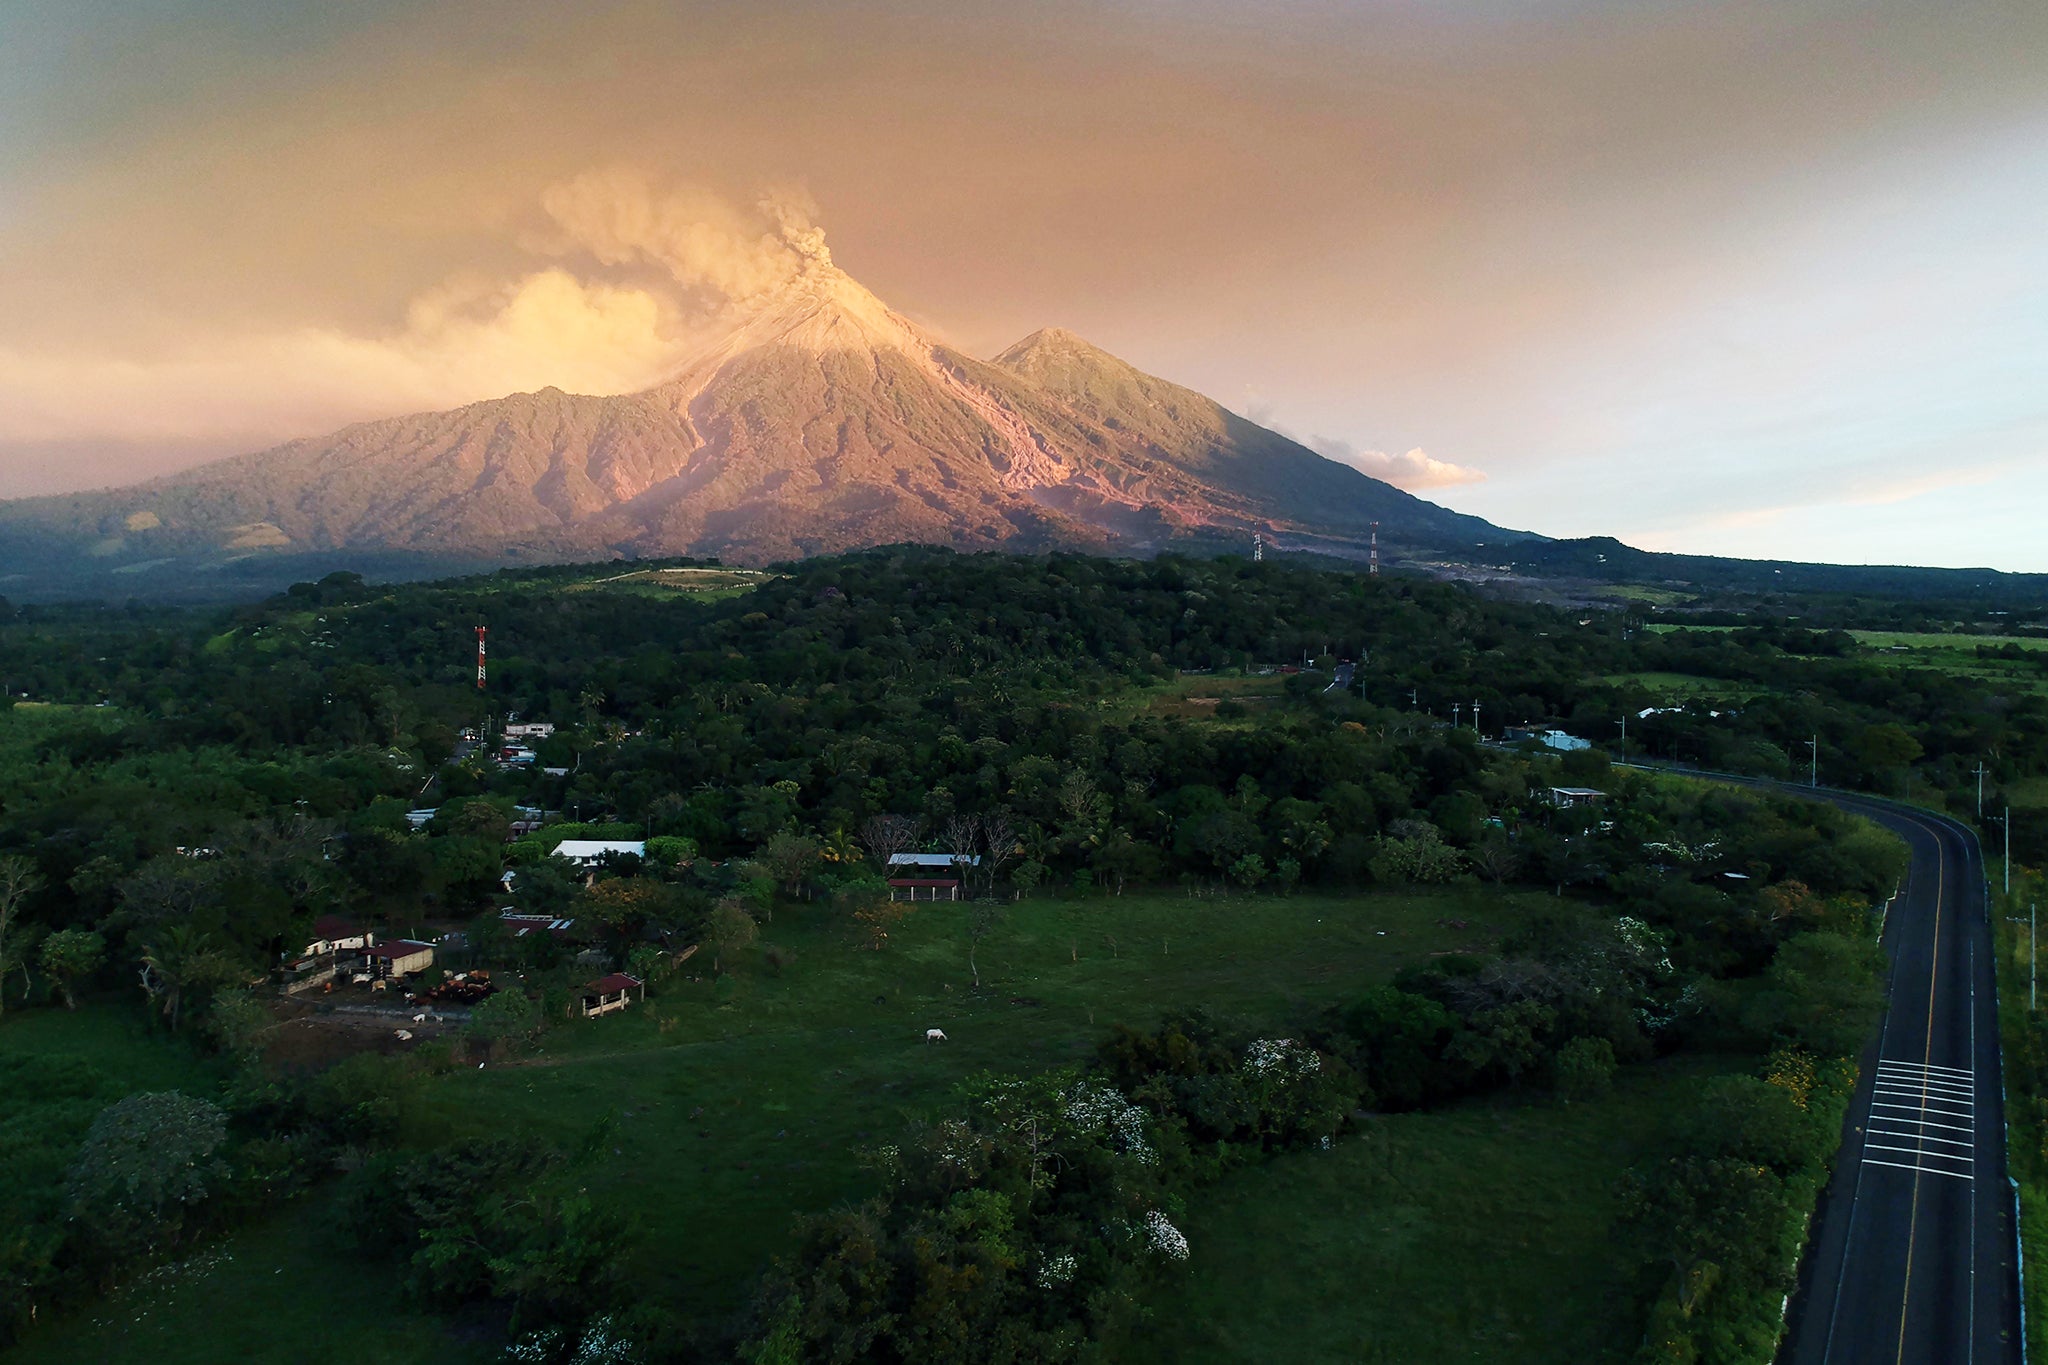 Guatemala’s Volcán de Fuego’s eruption saw entire villages covered in ash and lava